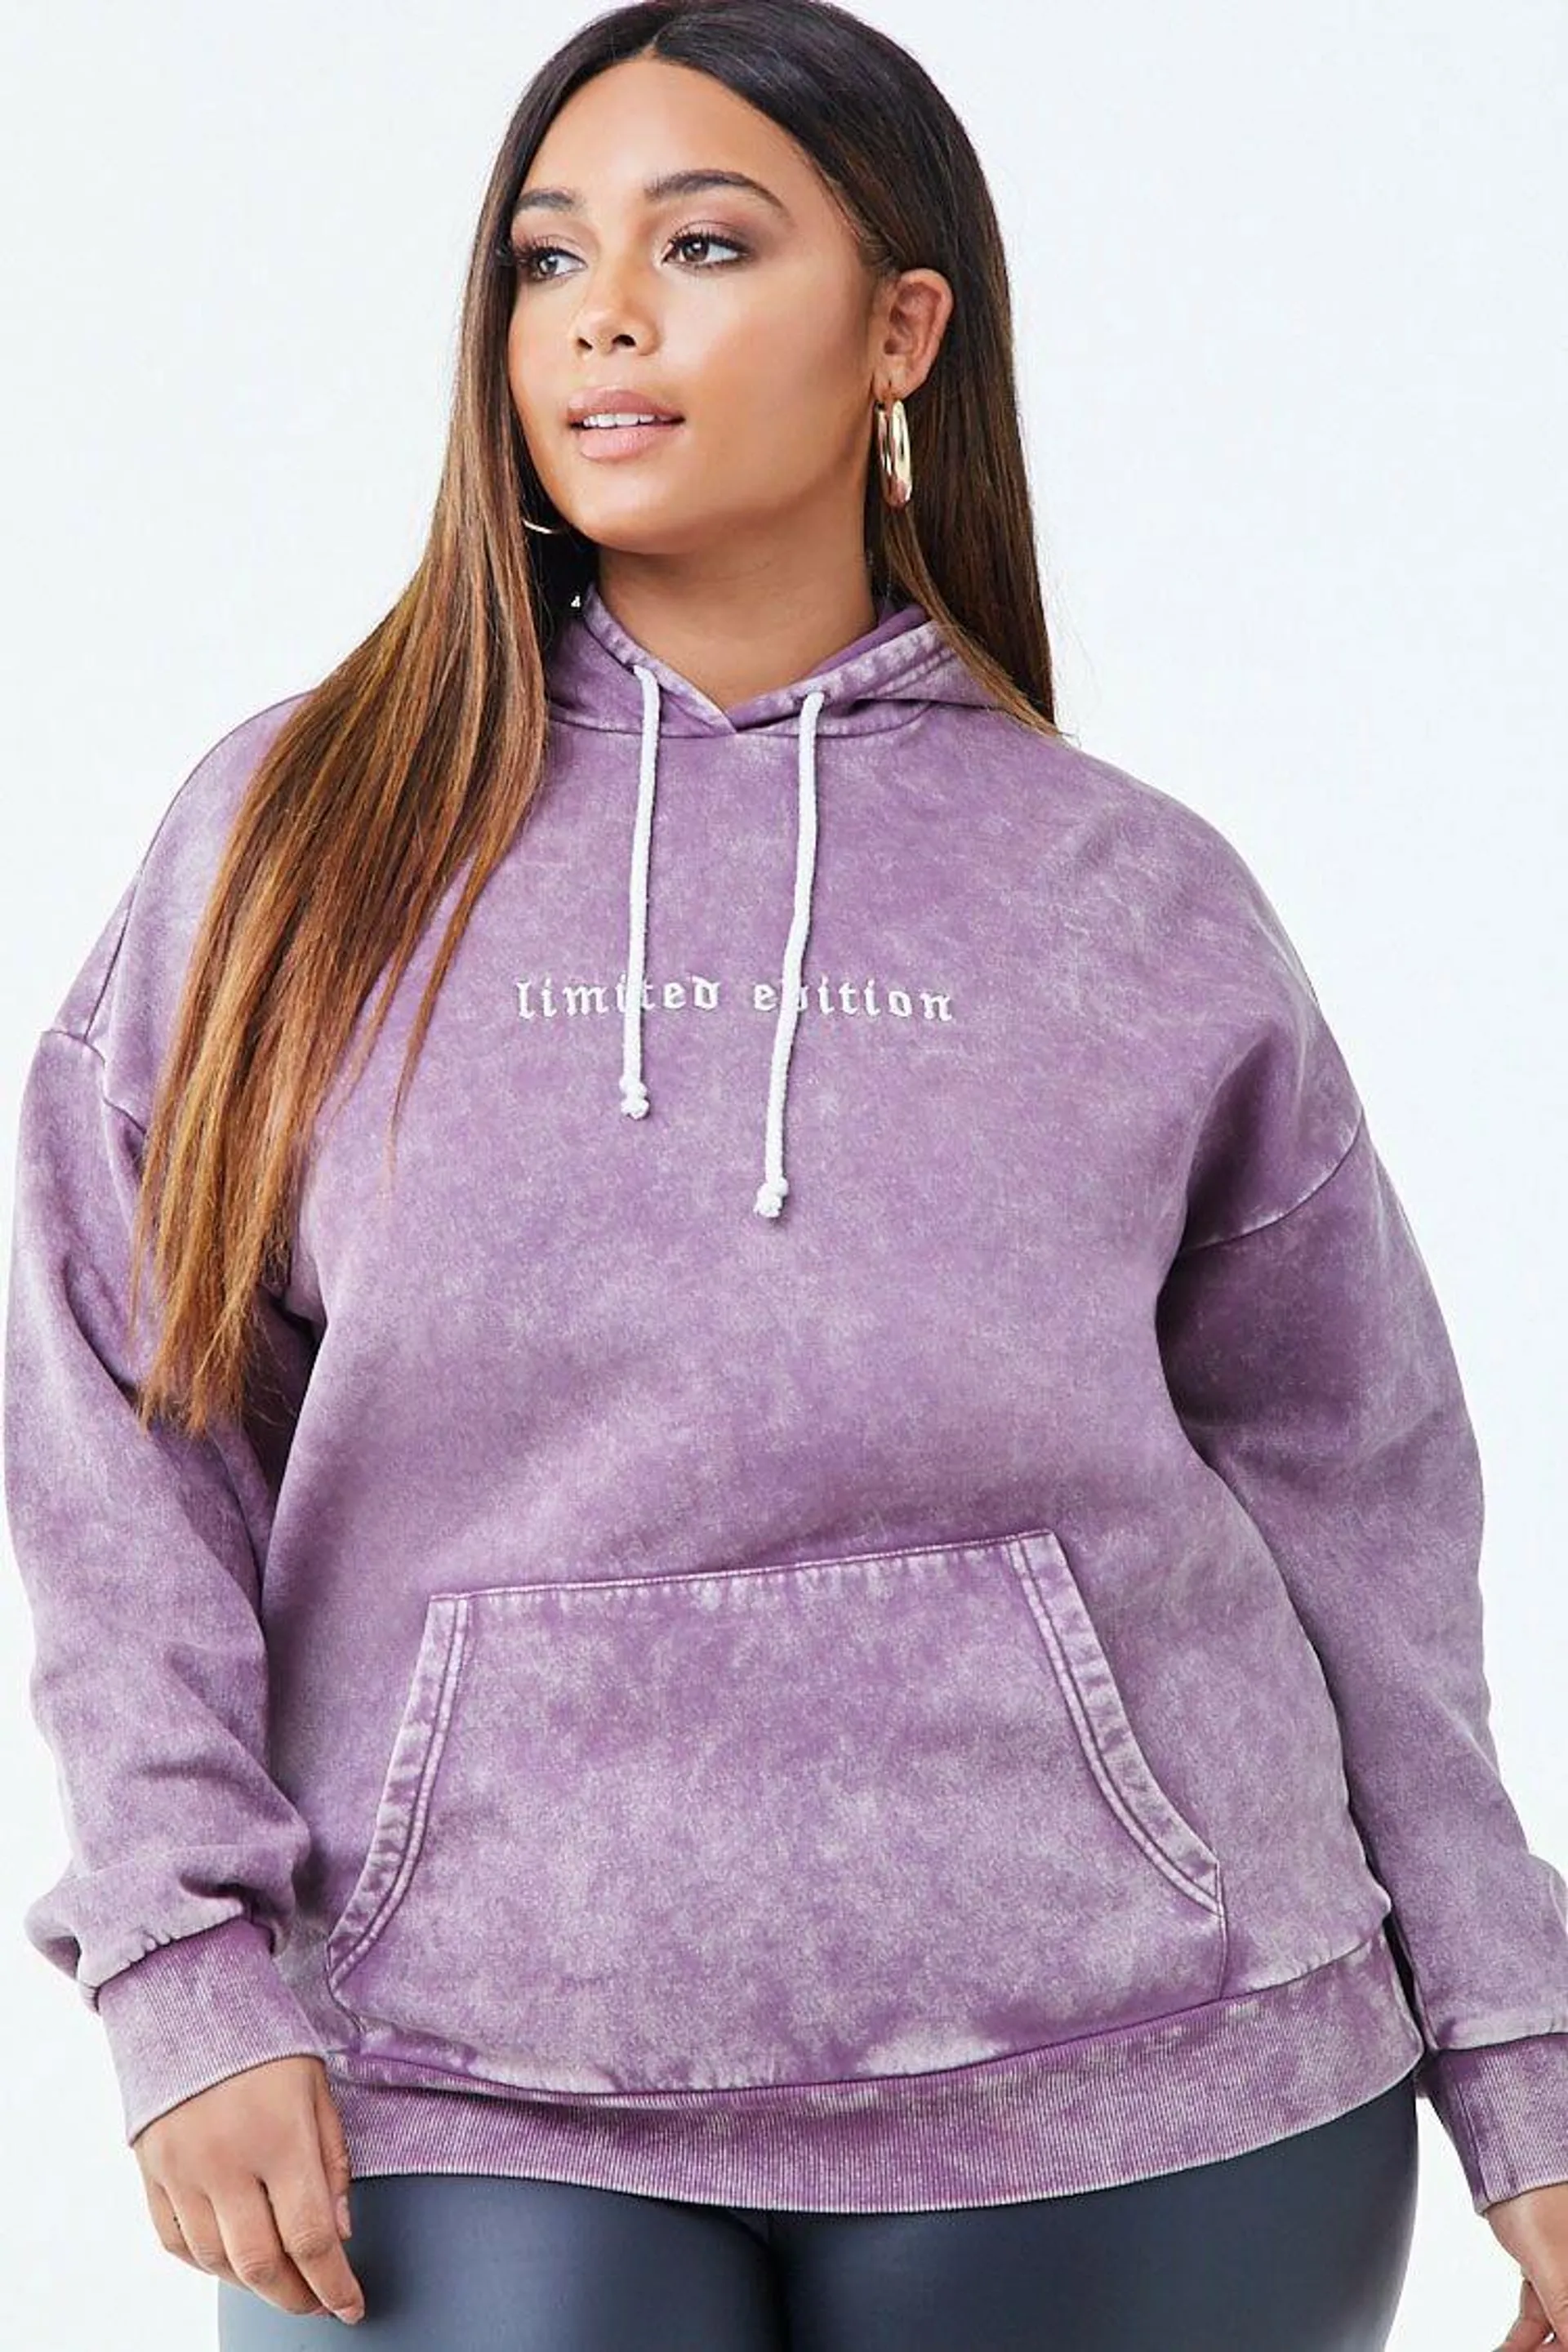 Plus Size Limited Edition Graphic Hoodie Purple White